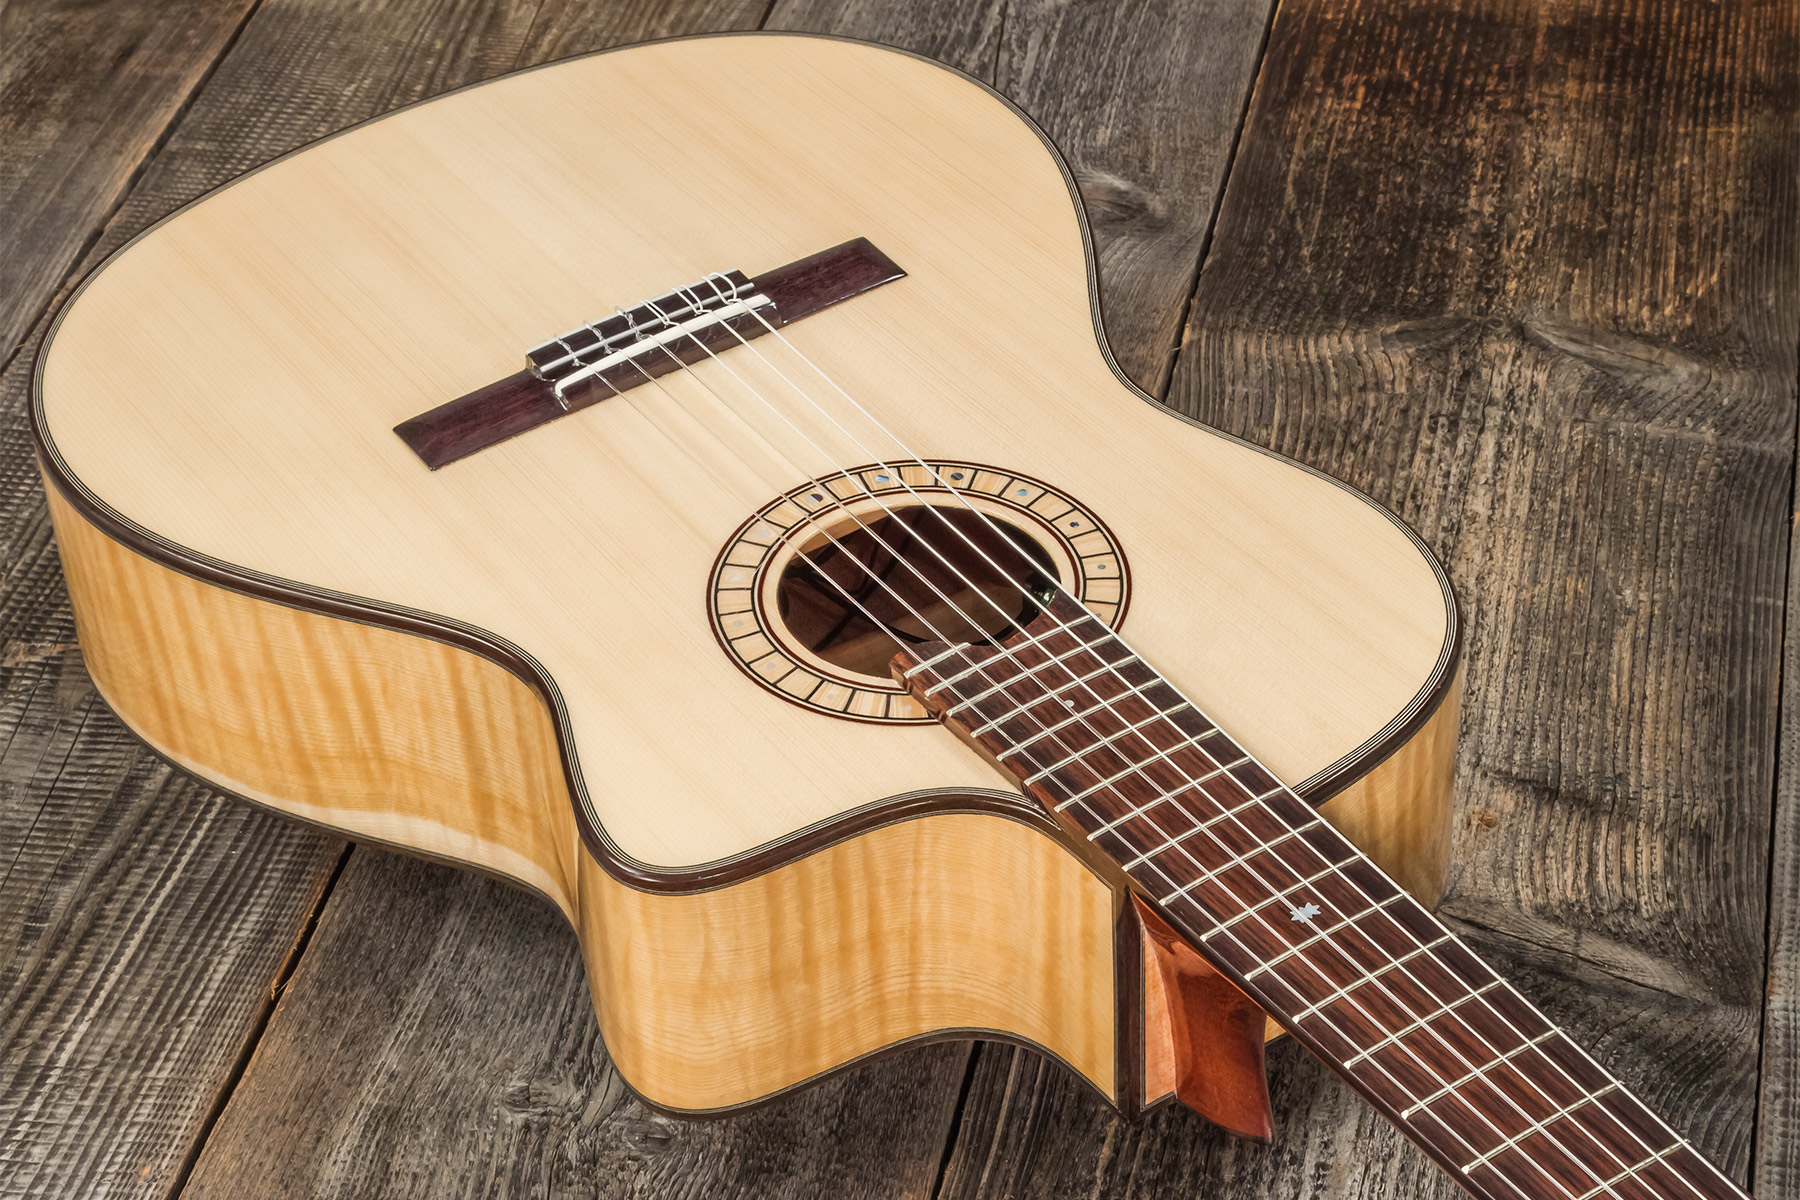 Martinez Crossover Mp14-mp Cw Epicea Erable Rw - Natural - Classical guitar 4/4 size - Variation 2